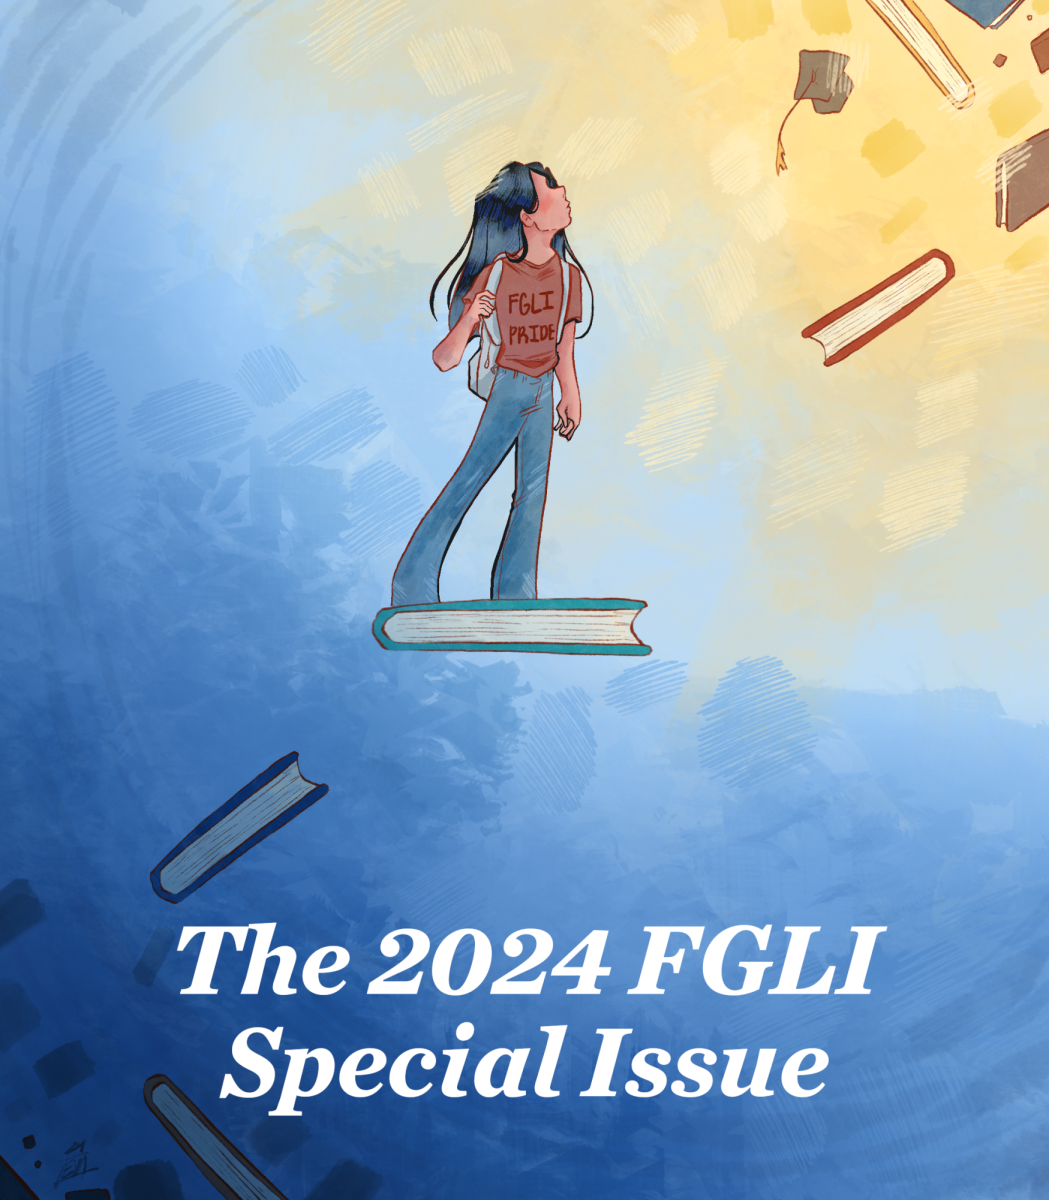 FGLI Special Issue: A Foreword from the Editor